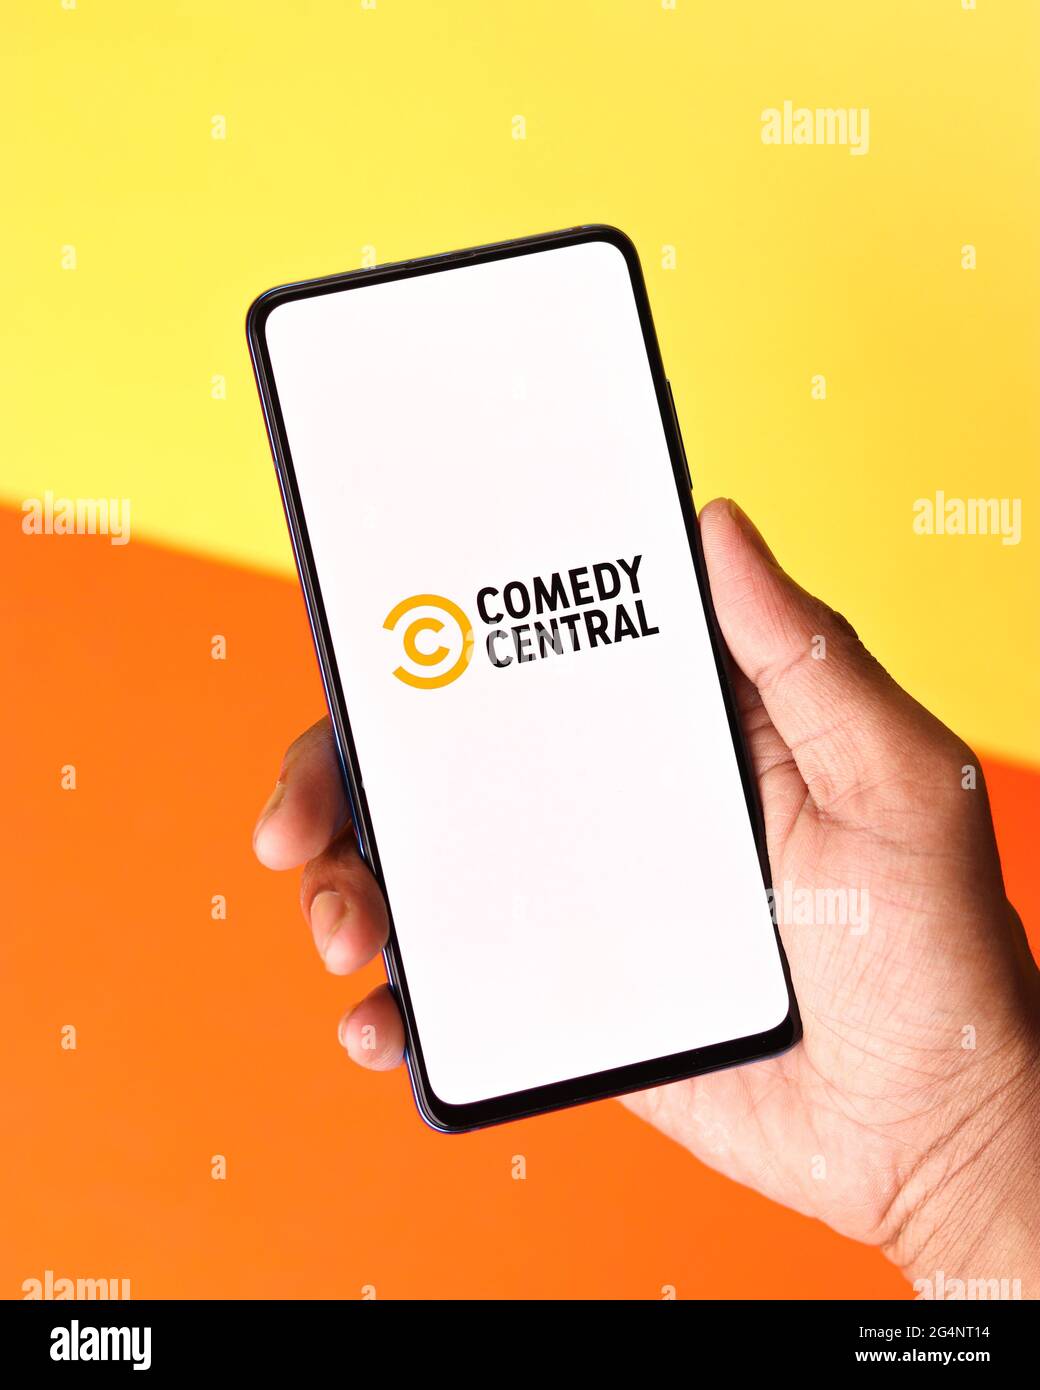 Comedy Central logo on phone screen stock image. Stock Photo